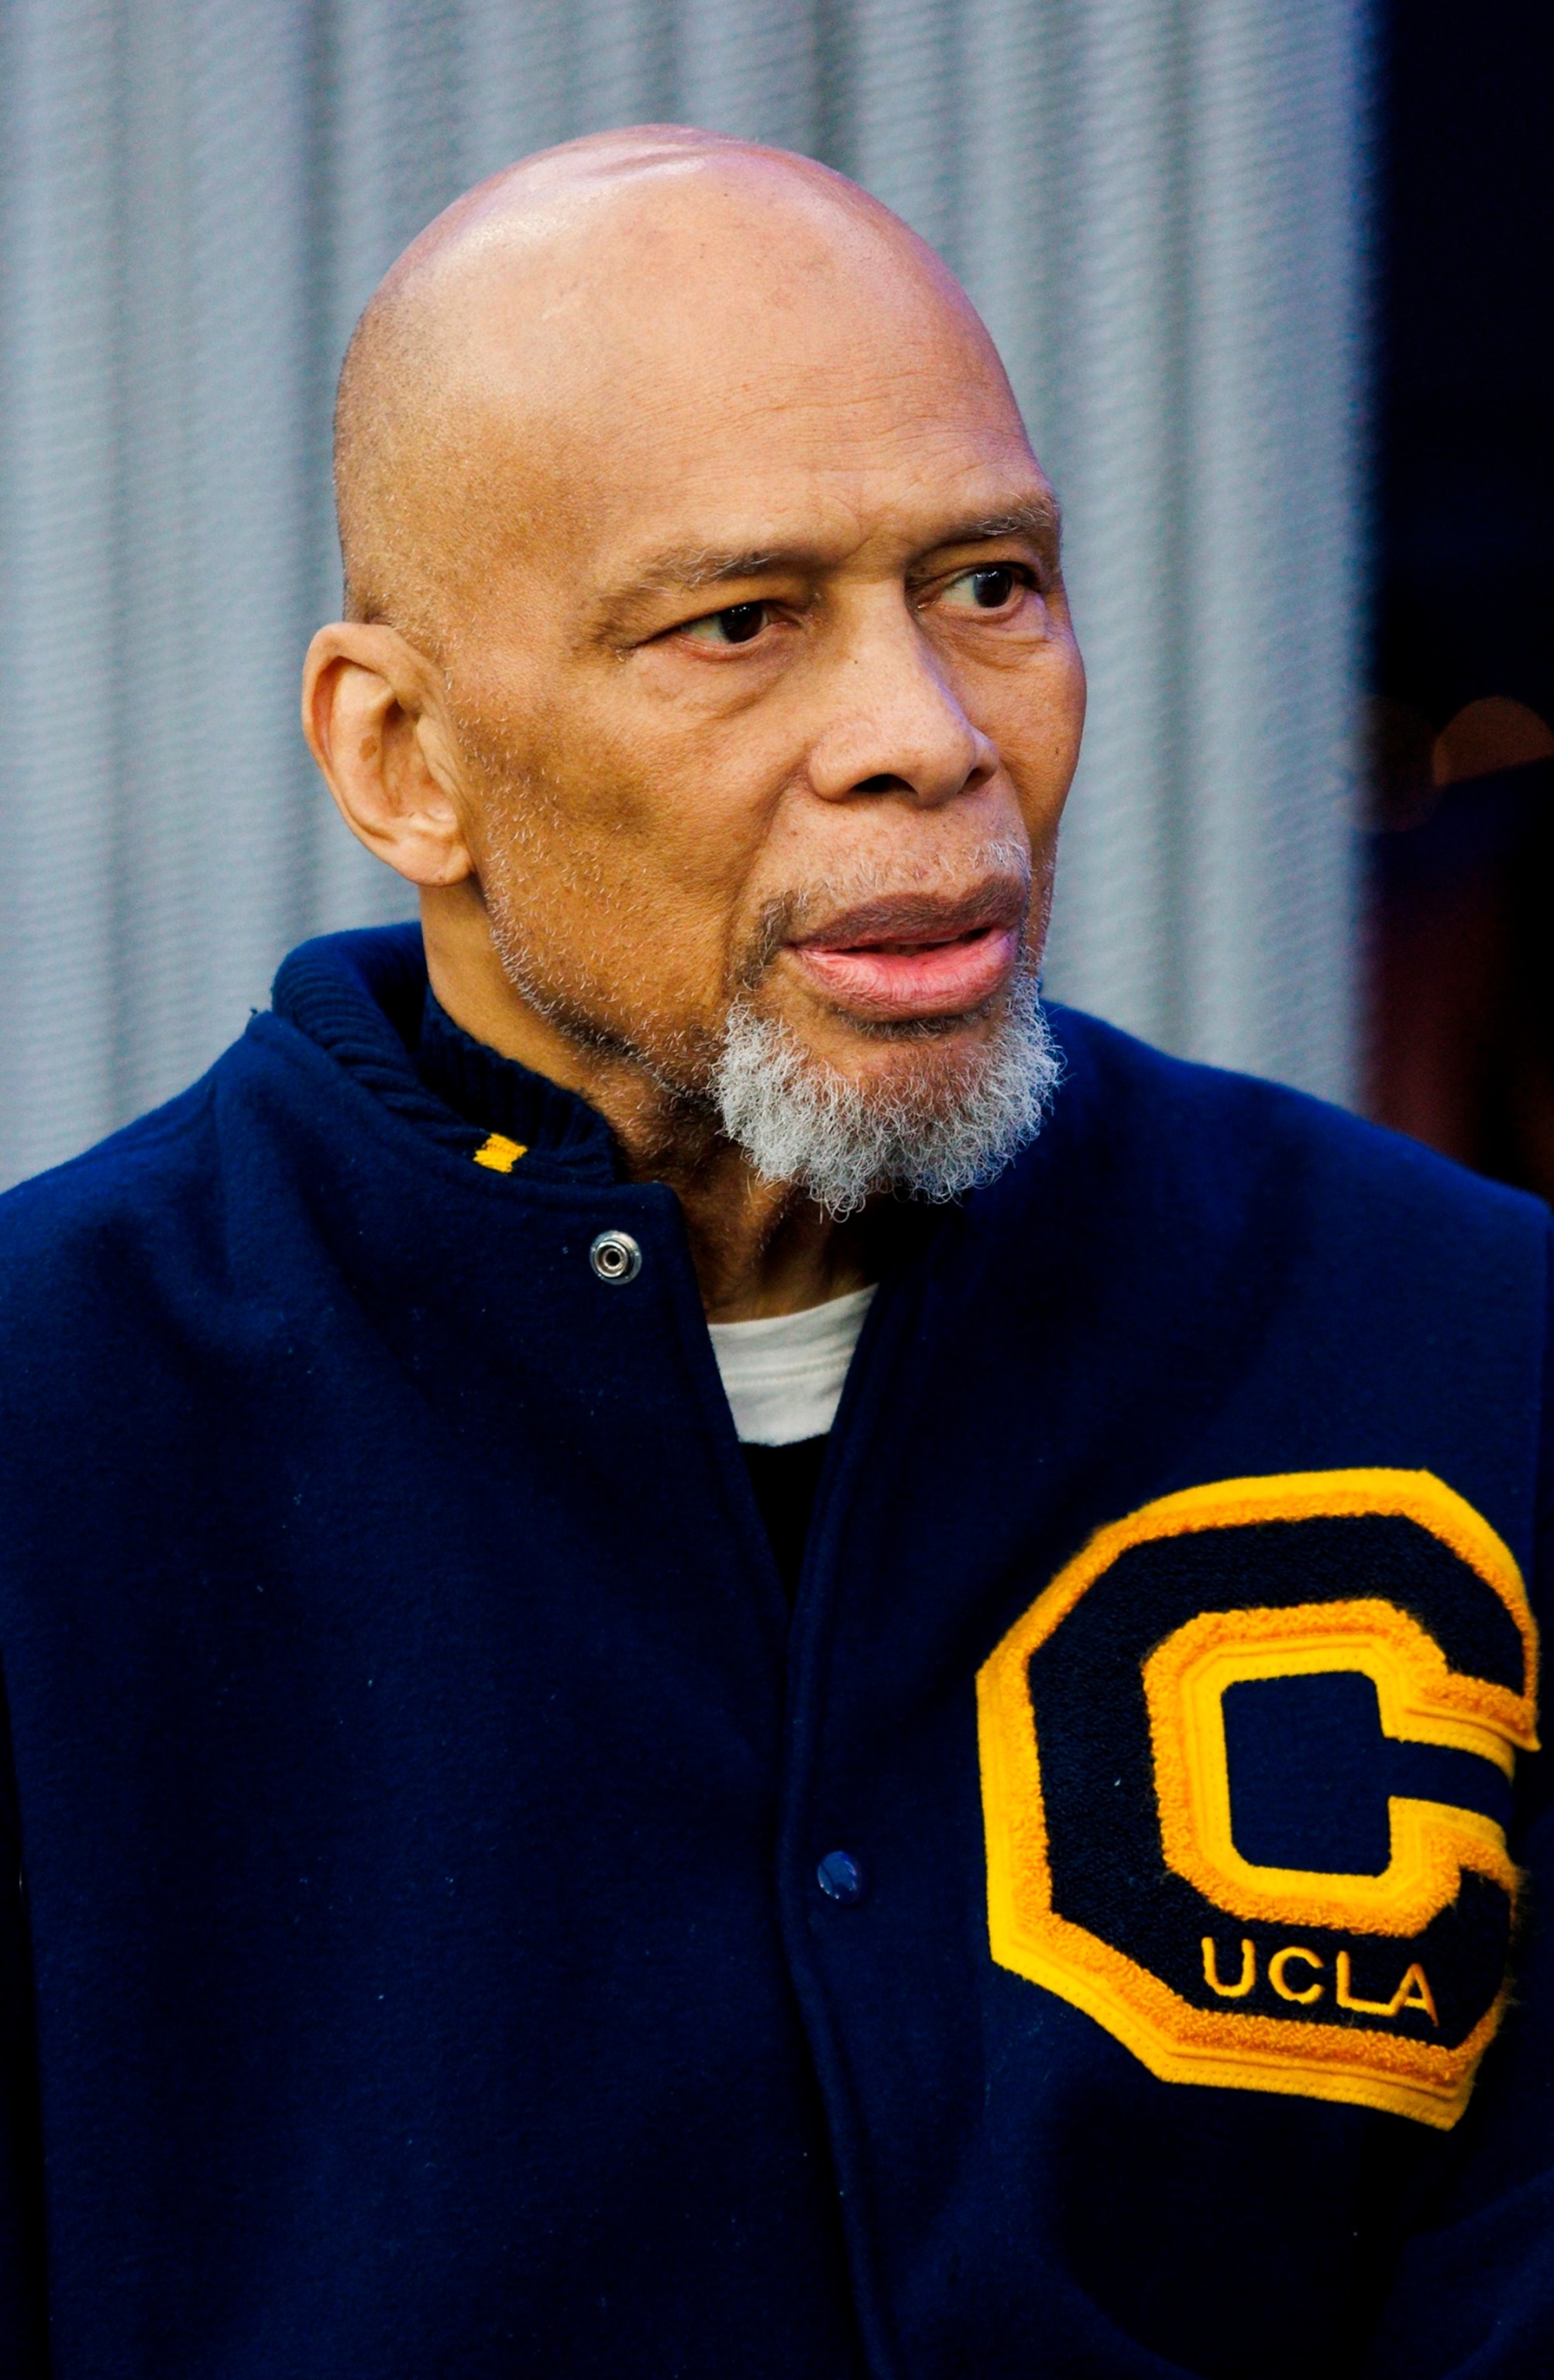 PHOTO: In this Dec. 3, 2023, file photo, former NBA player Kareem Abdul-Jabbar is shown during a game between the Cleveland Browns and the Los Angeles Rams at SoFi Stadium in Inglewood, Calif.